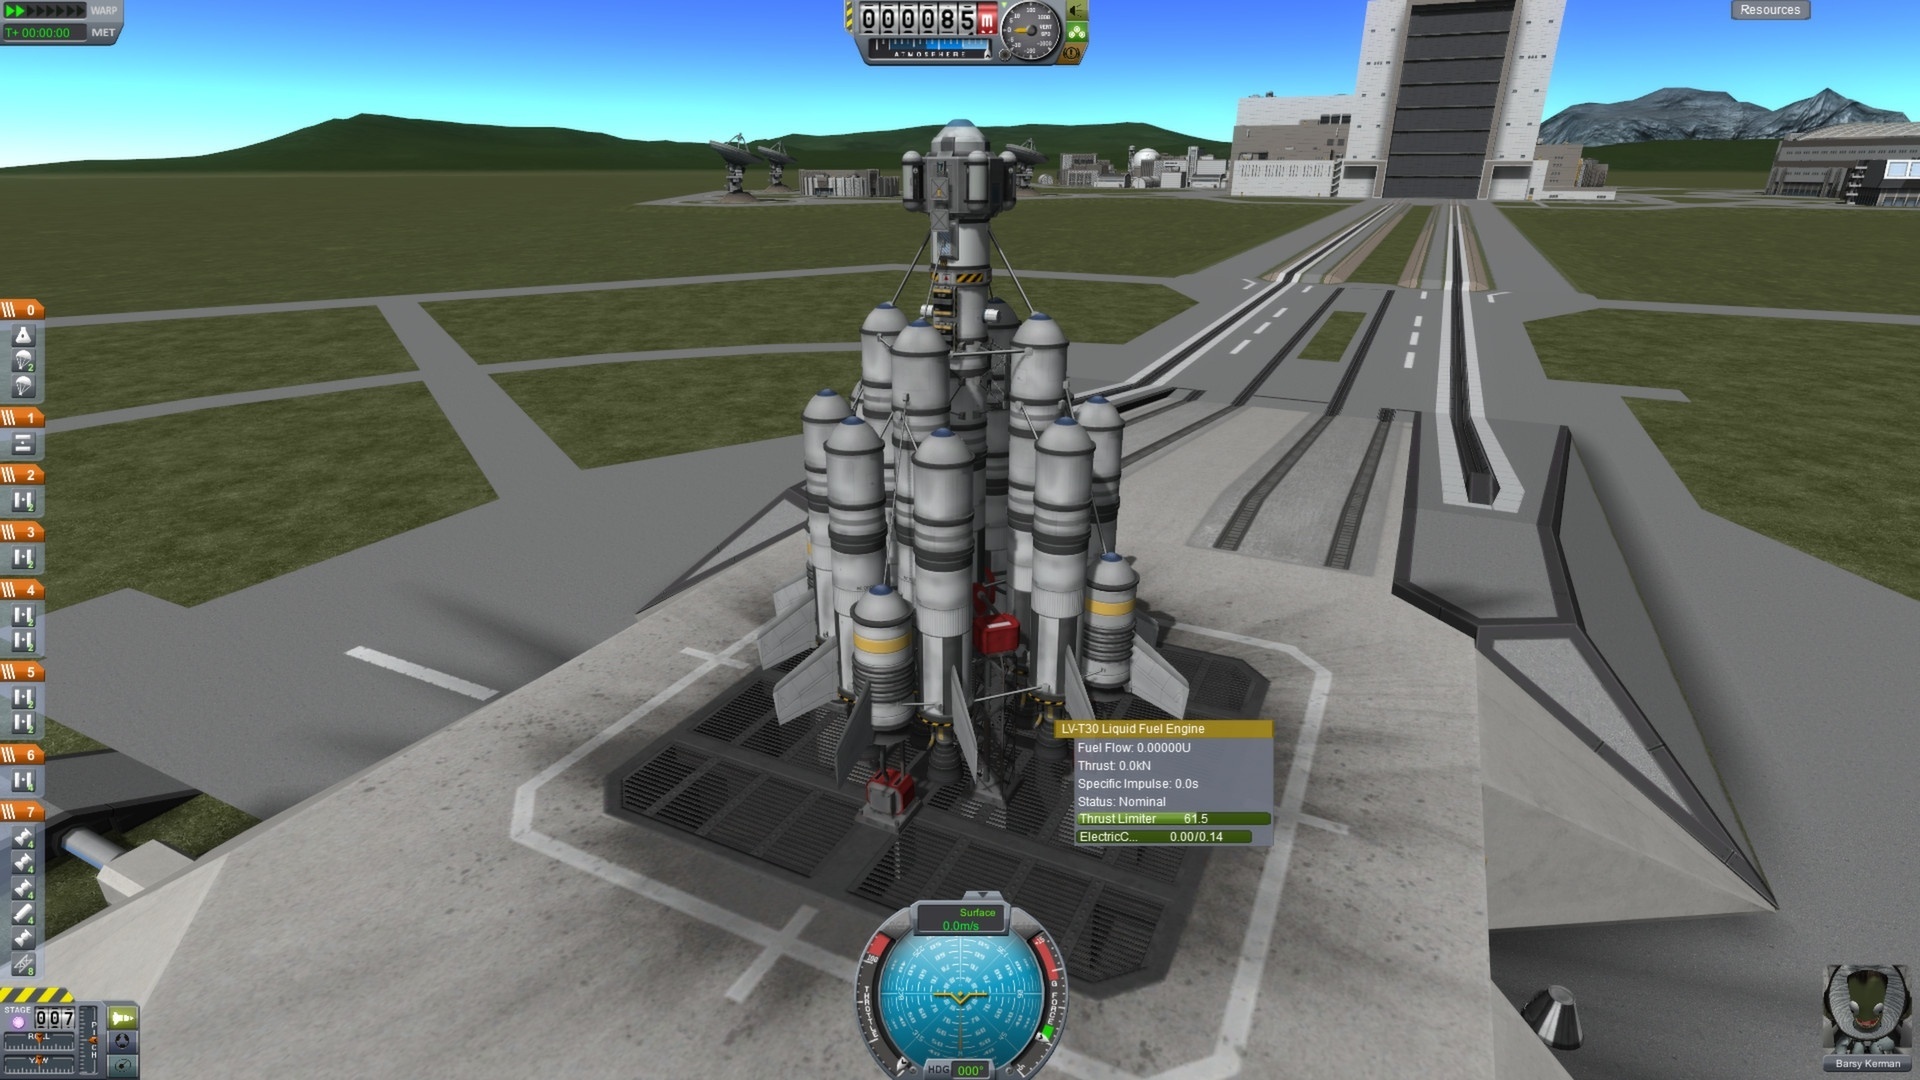 kerbal space program 2 questions and answers